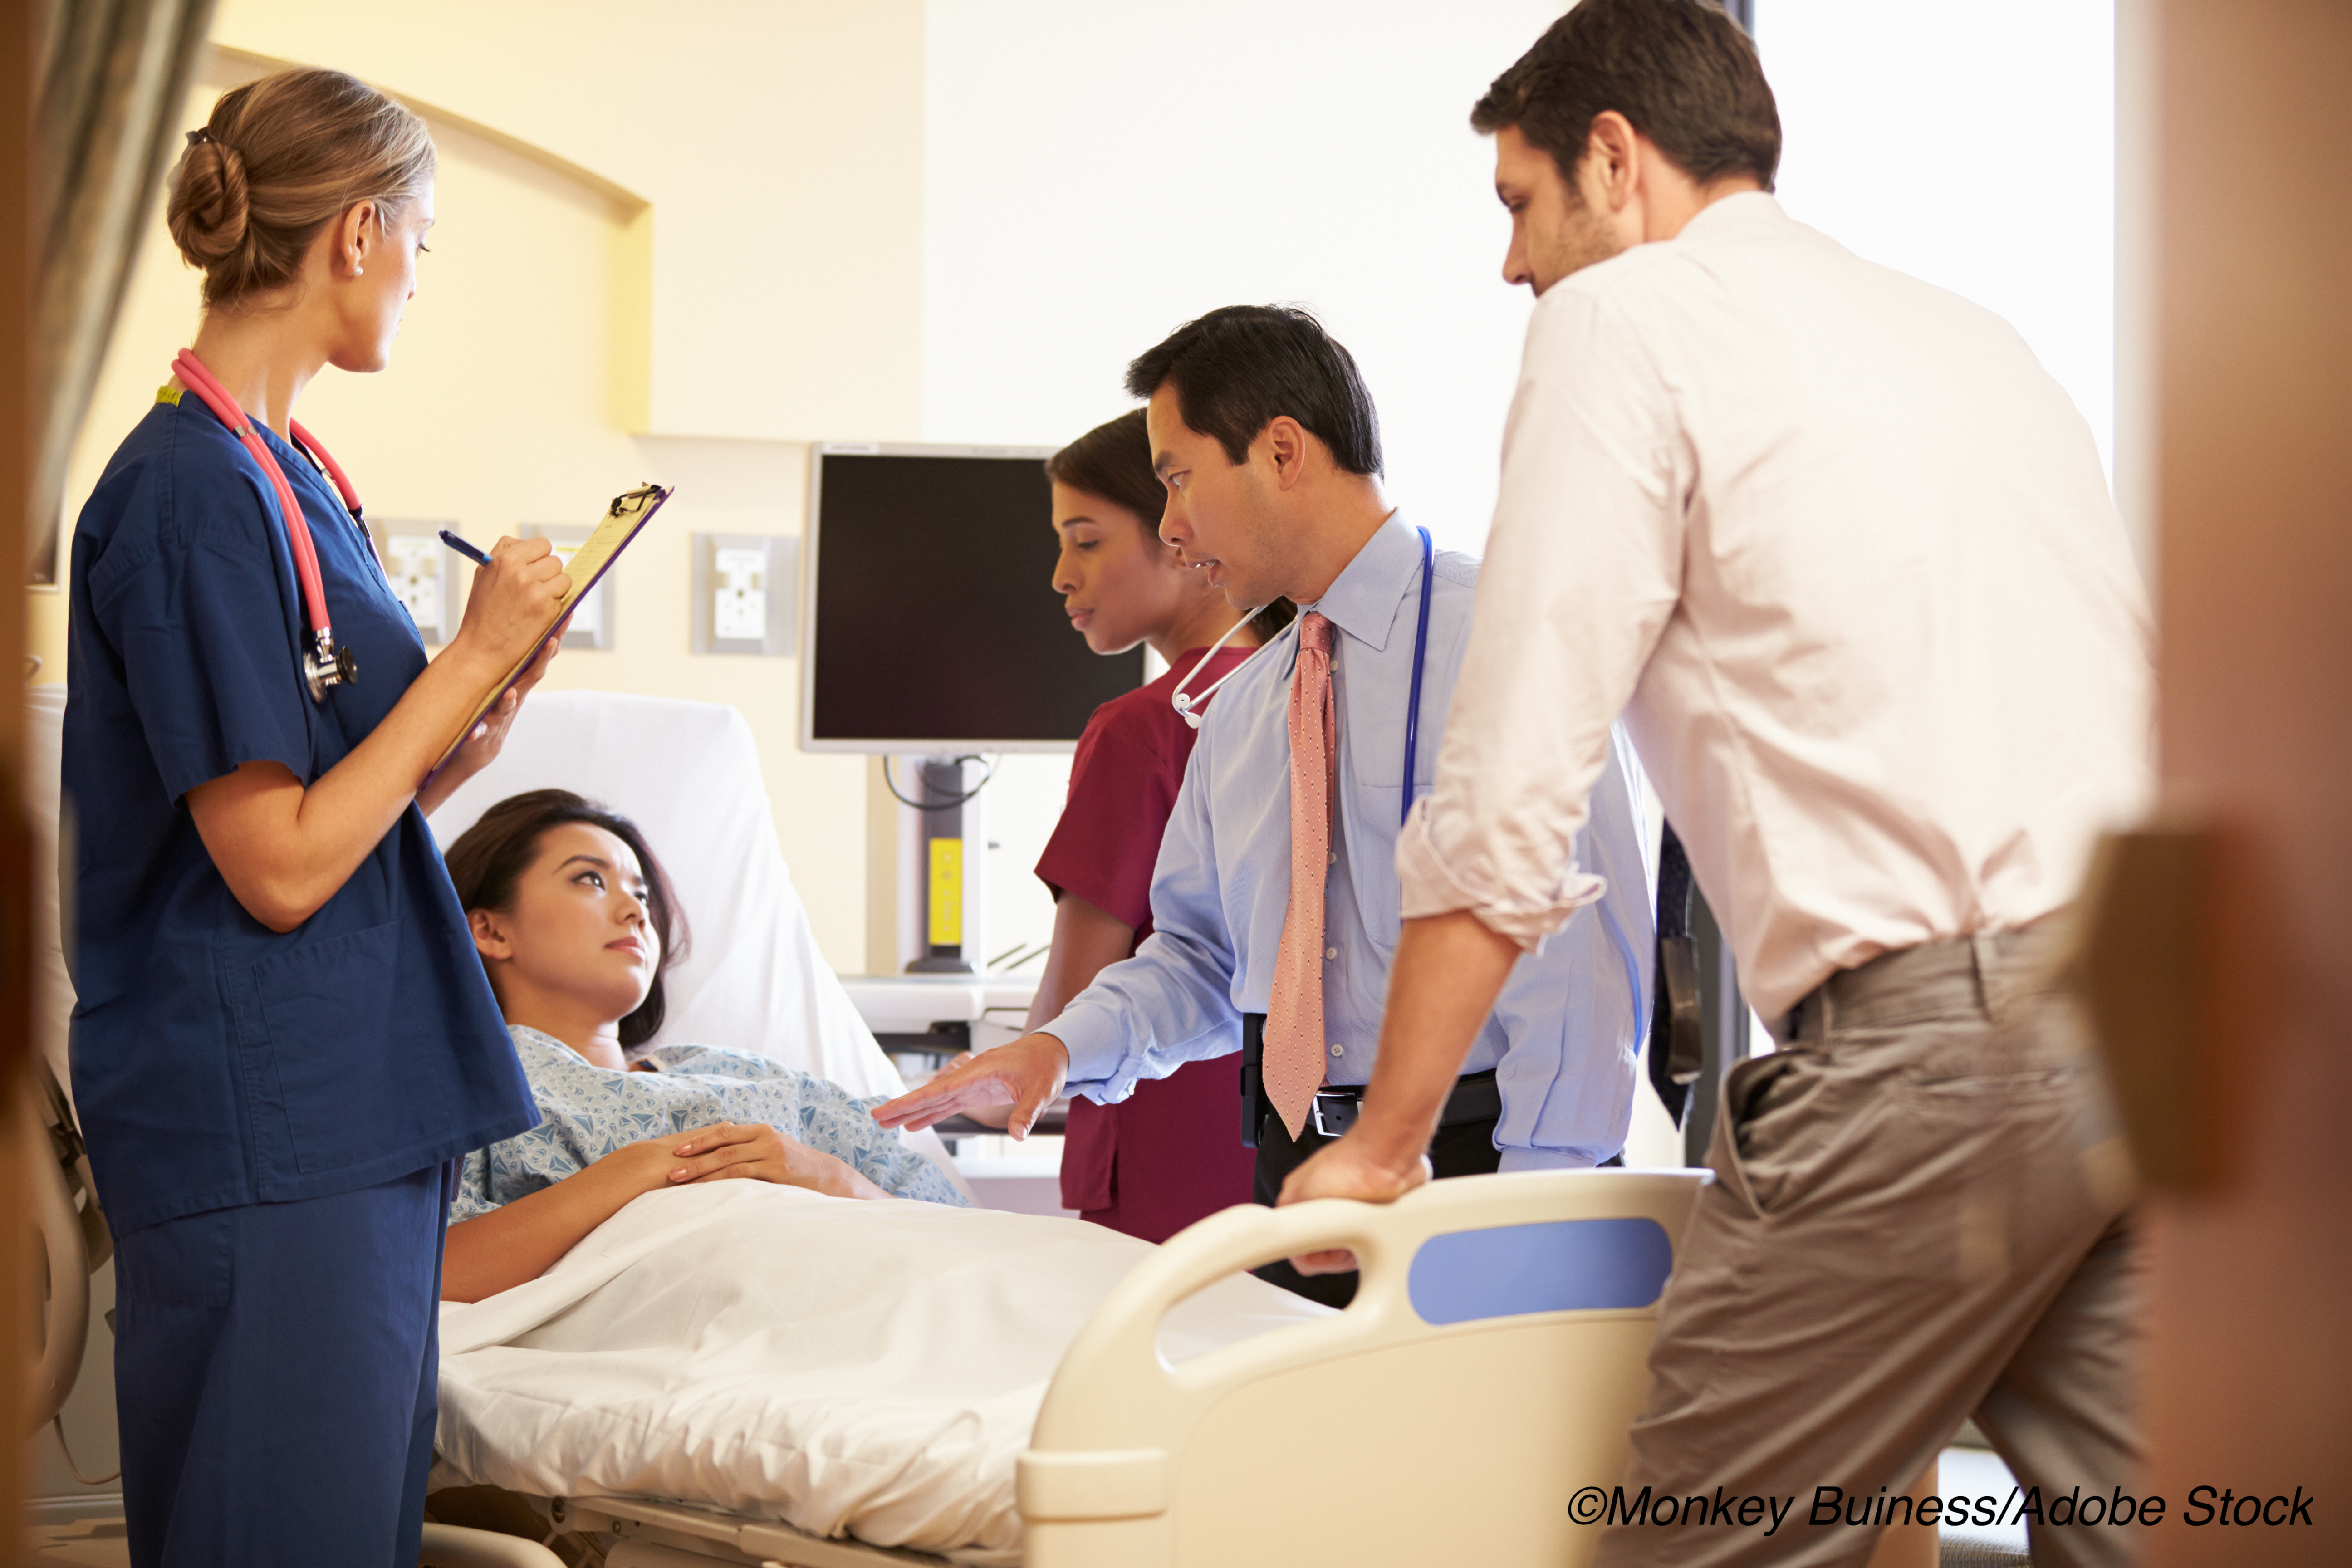 Should Case Presentations Occur at the Patient’s Bedside?